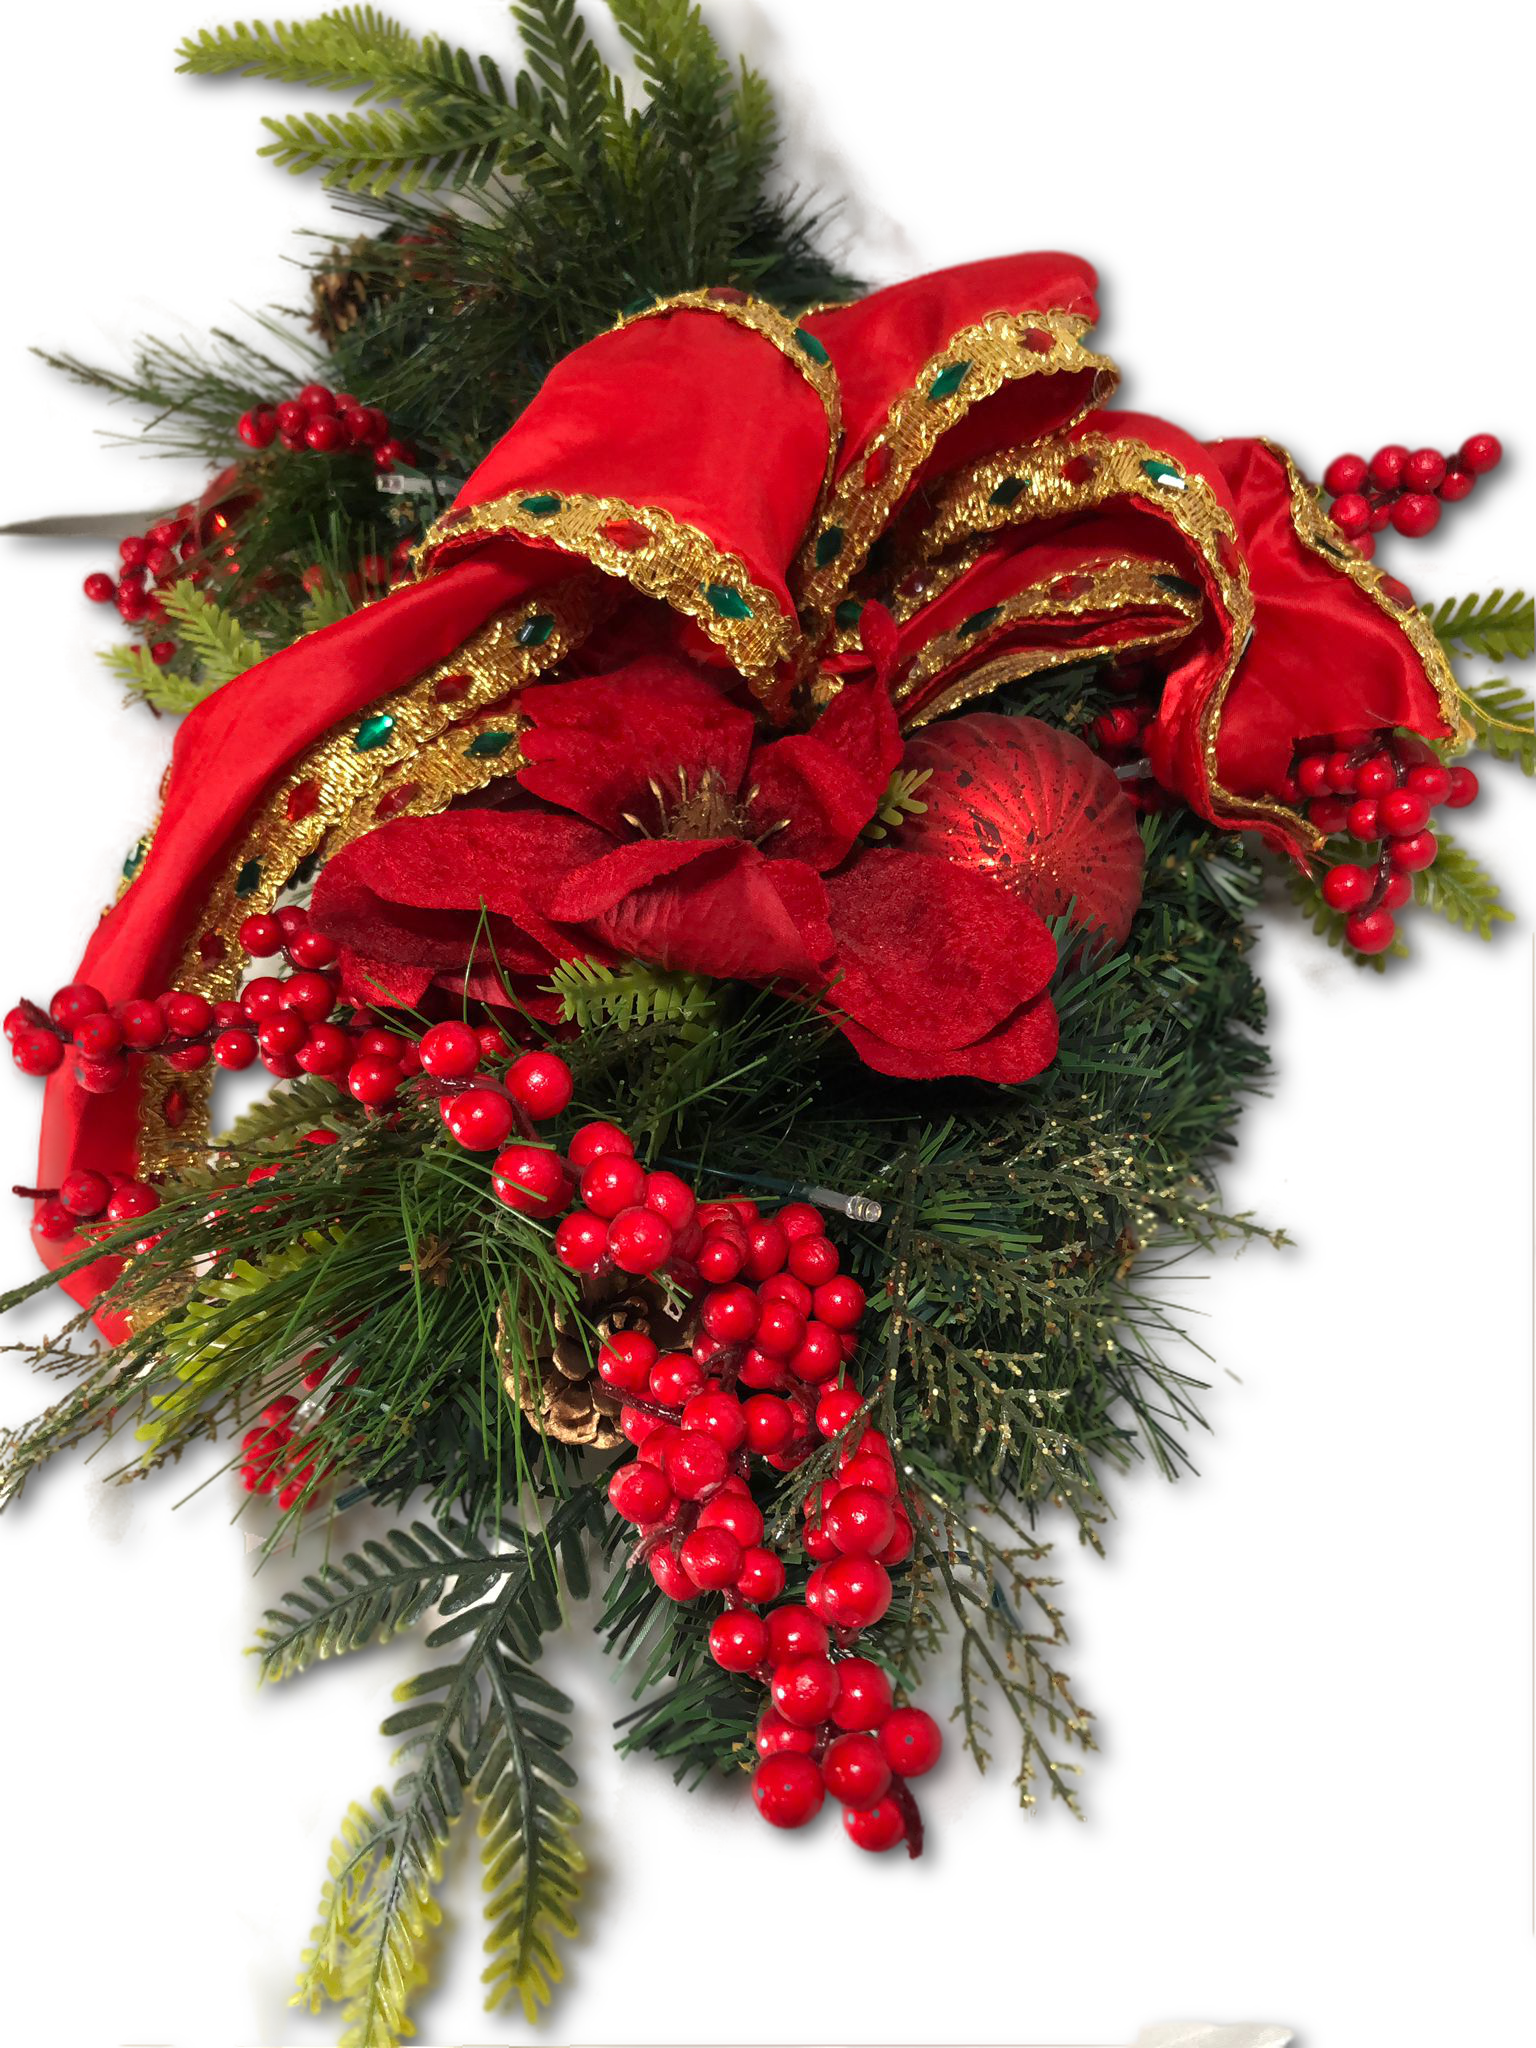 Decorative Garland berry and pine with lights and timer